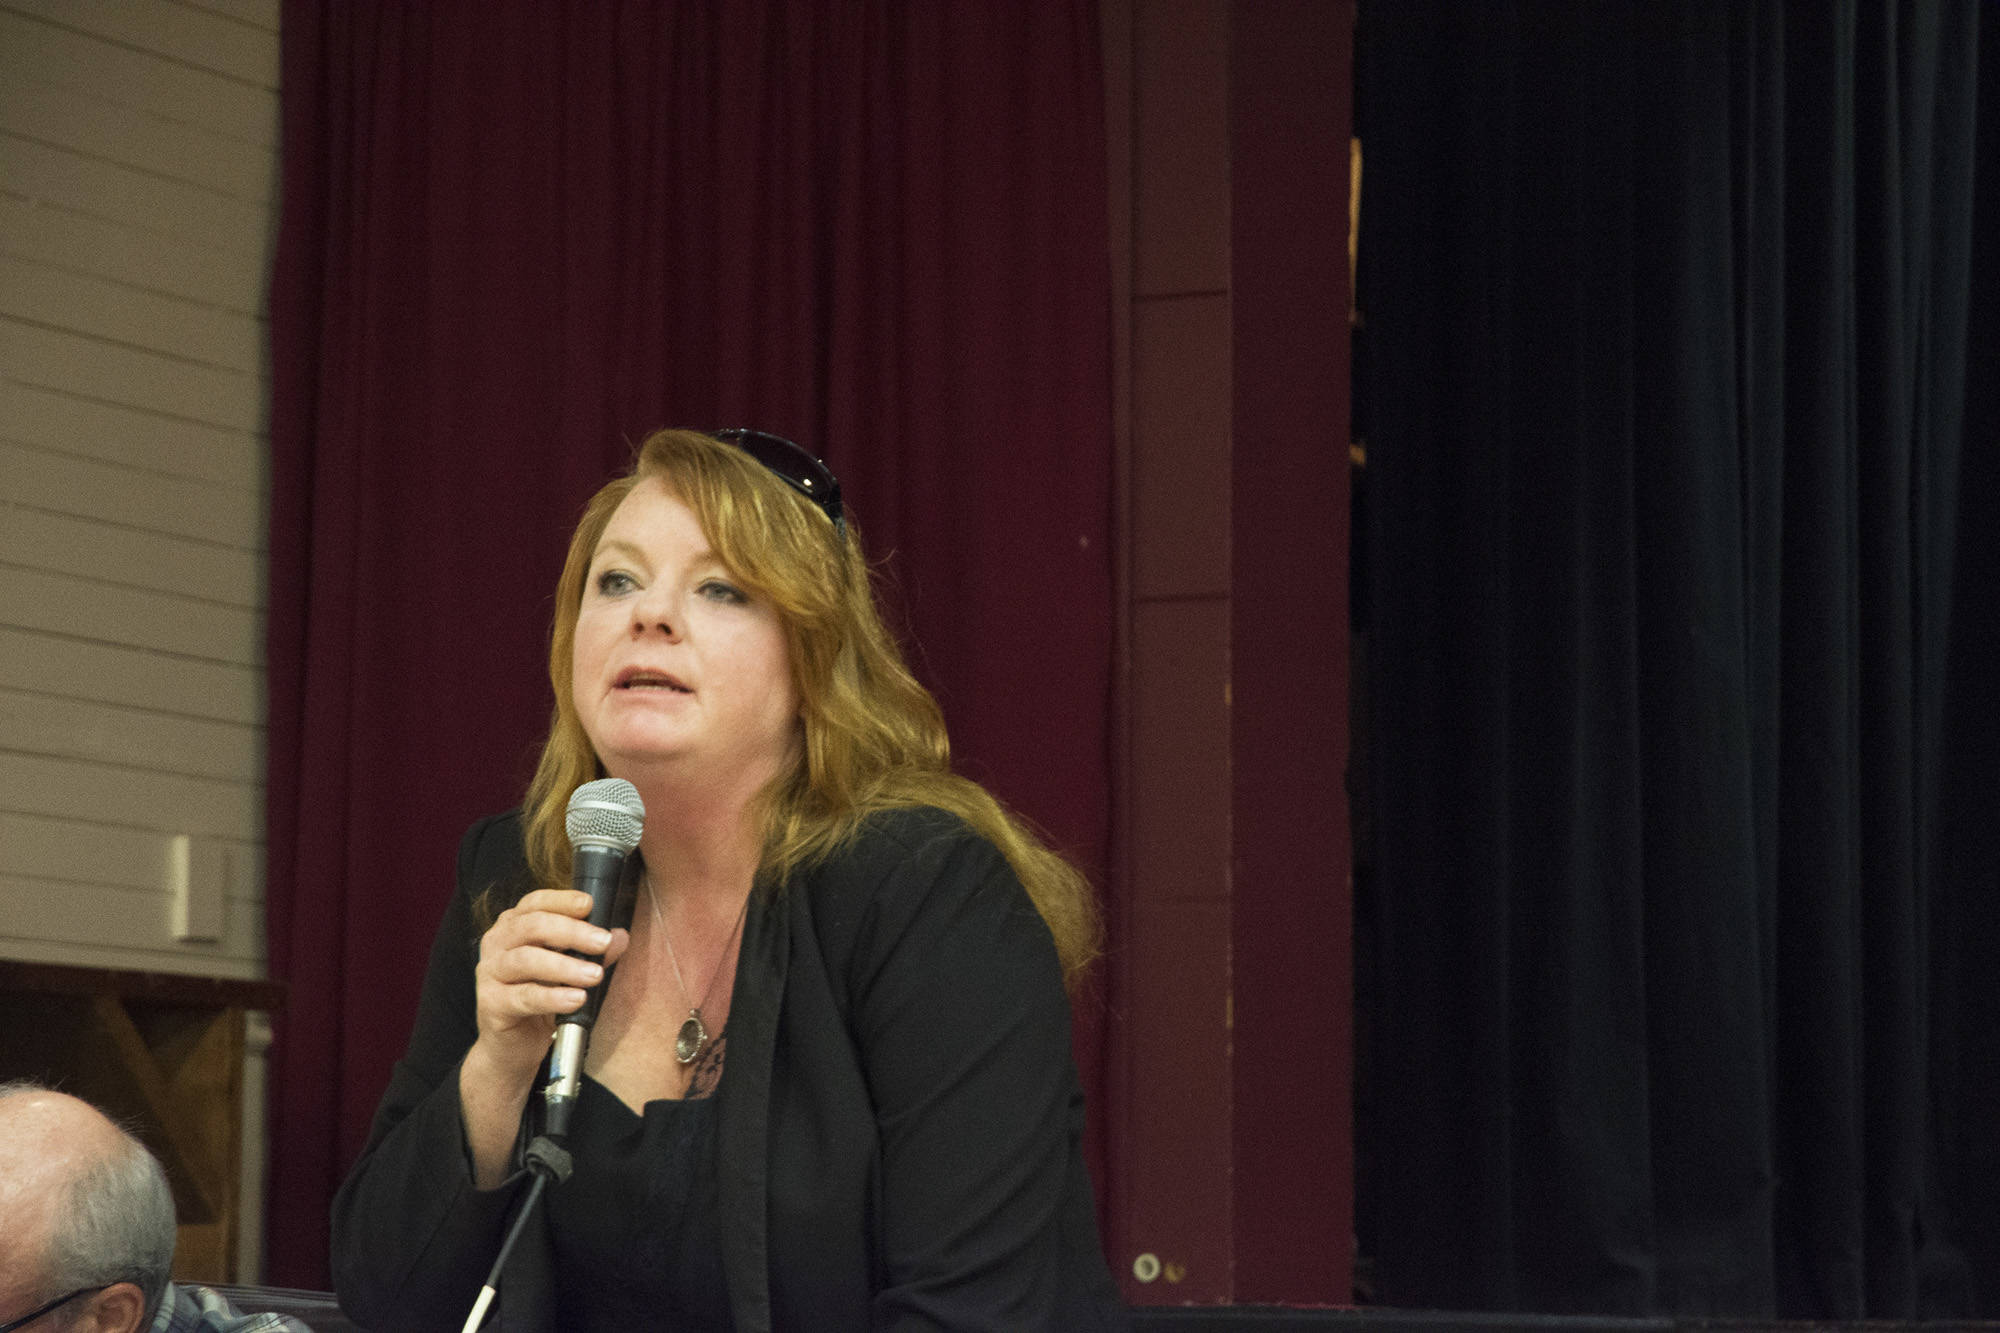 13851618_web1_20181004-SAA-Sicamous-All-Candidates-forum-JE-009